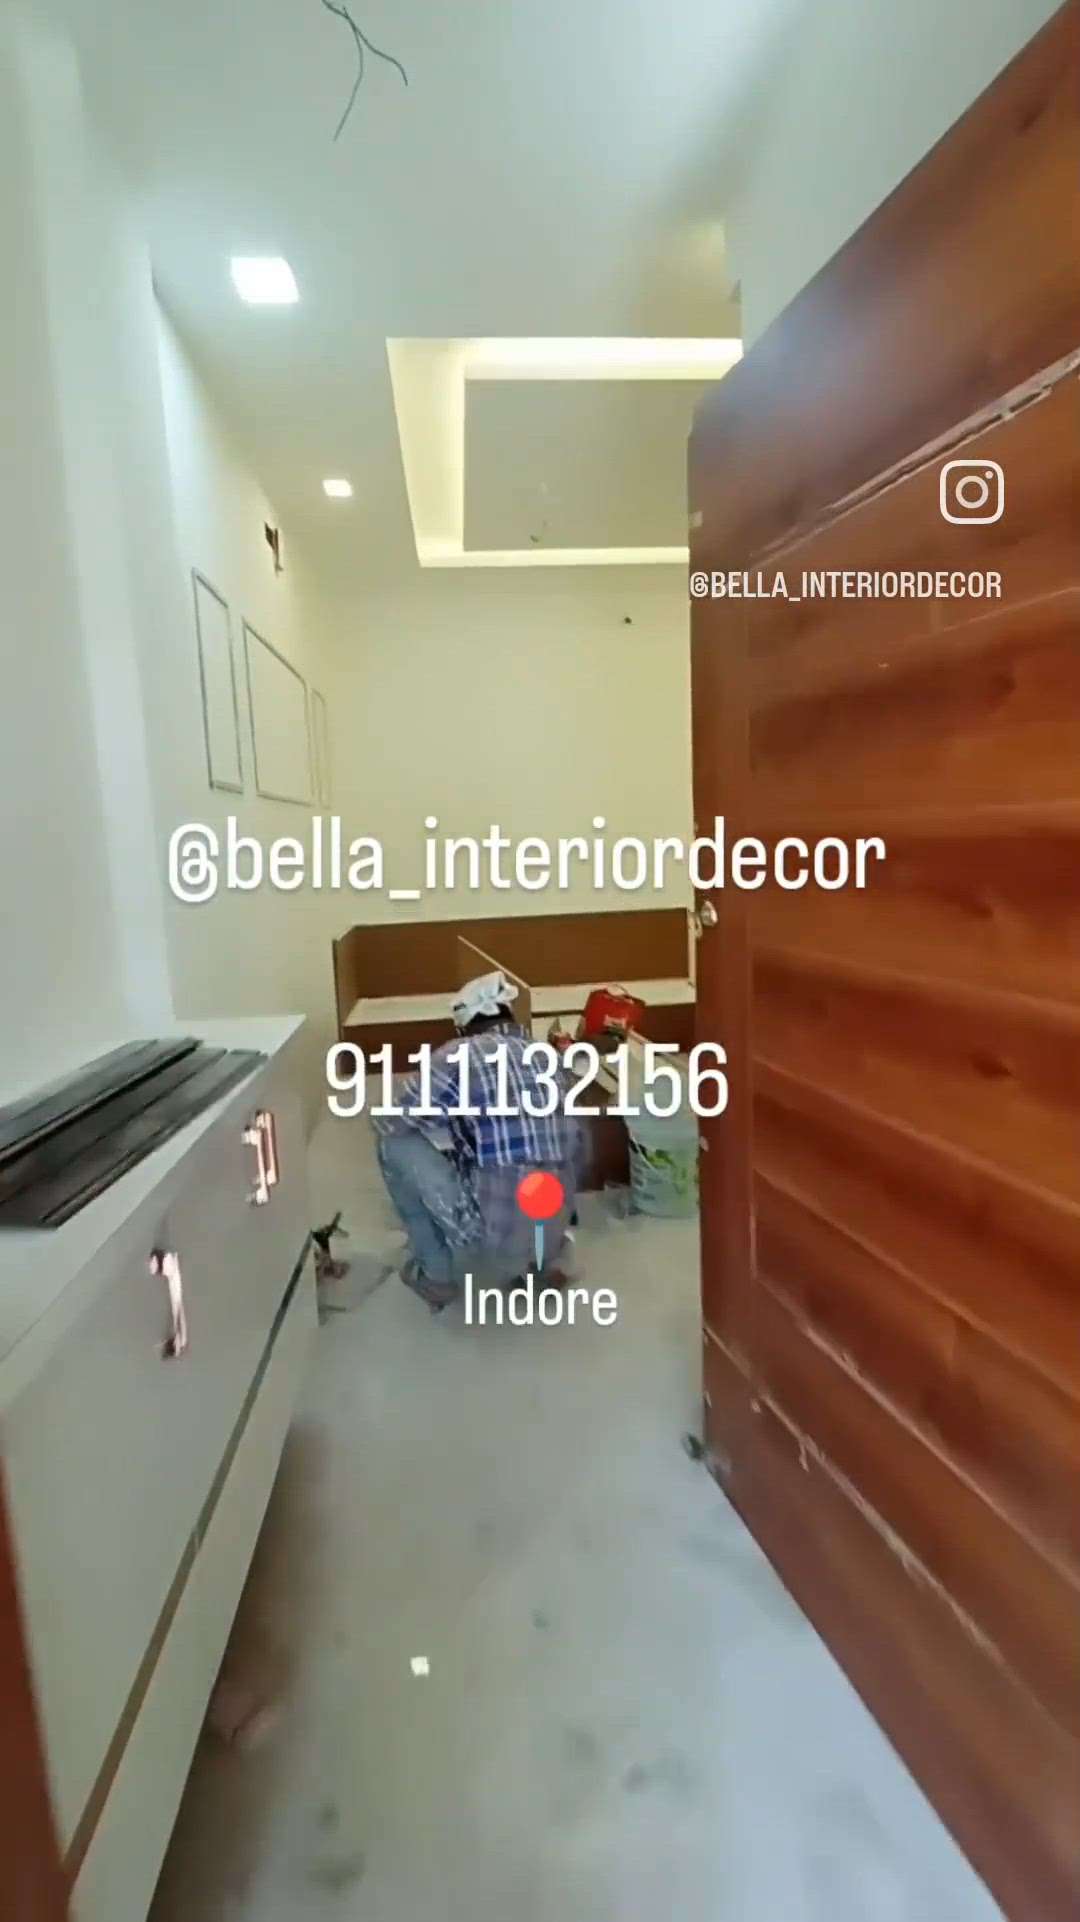 new project  


For house interiors contact

BELLA INTERIOR DECOR 
.
.
Make Your Dream House Come True With @bella_interiordecor 
.
.
• Your Budget ~ Their Brain 
• Themed Based Work
• BedRooms, Living Rooms, Study, Kitchen, Offices, Showrooms & More! 
.
.
Contact - 9111132156
.
Address :- jangirwala square Indore m.p. 

Credits: bella_interiordecor 

#interiordesign #design #interior #homedecor
#architecture #home #decor #interiors
#homedesign #interiordesigner #furniture
 #designer #interiorstyling
#interiordecor #homesweethome 
#furnituredesign #livingroom #interiordecorating  #instagood #instagram
#kitchendesign #foryou #photographylover #explorepage✨ #explorepage #viralpost #trending #trends #reelsinstagram #exploremore   #kolopost   #koloapp  #koloviral  #koloindore  #InteriorDesigner  #indorehouse   #LUXURY_INTERIOR   #luxurysofa   #luxurylivingroom